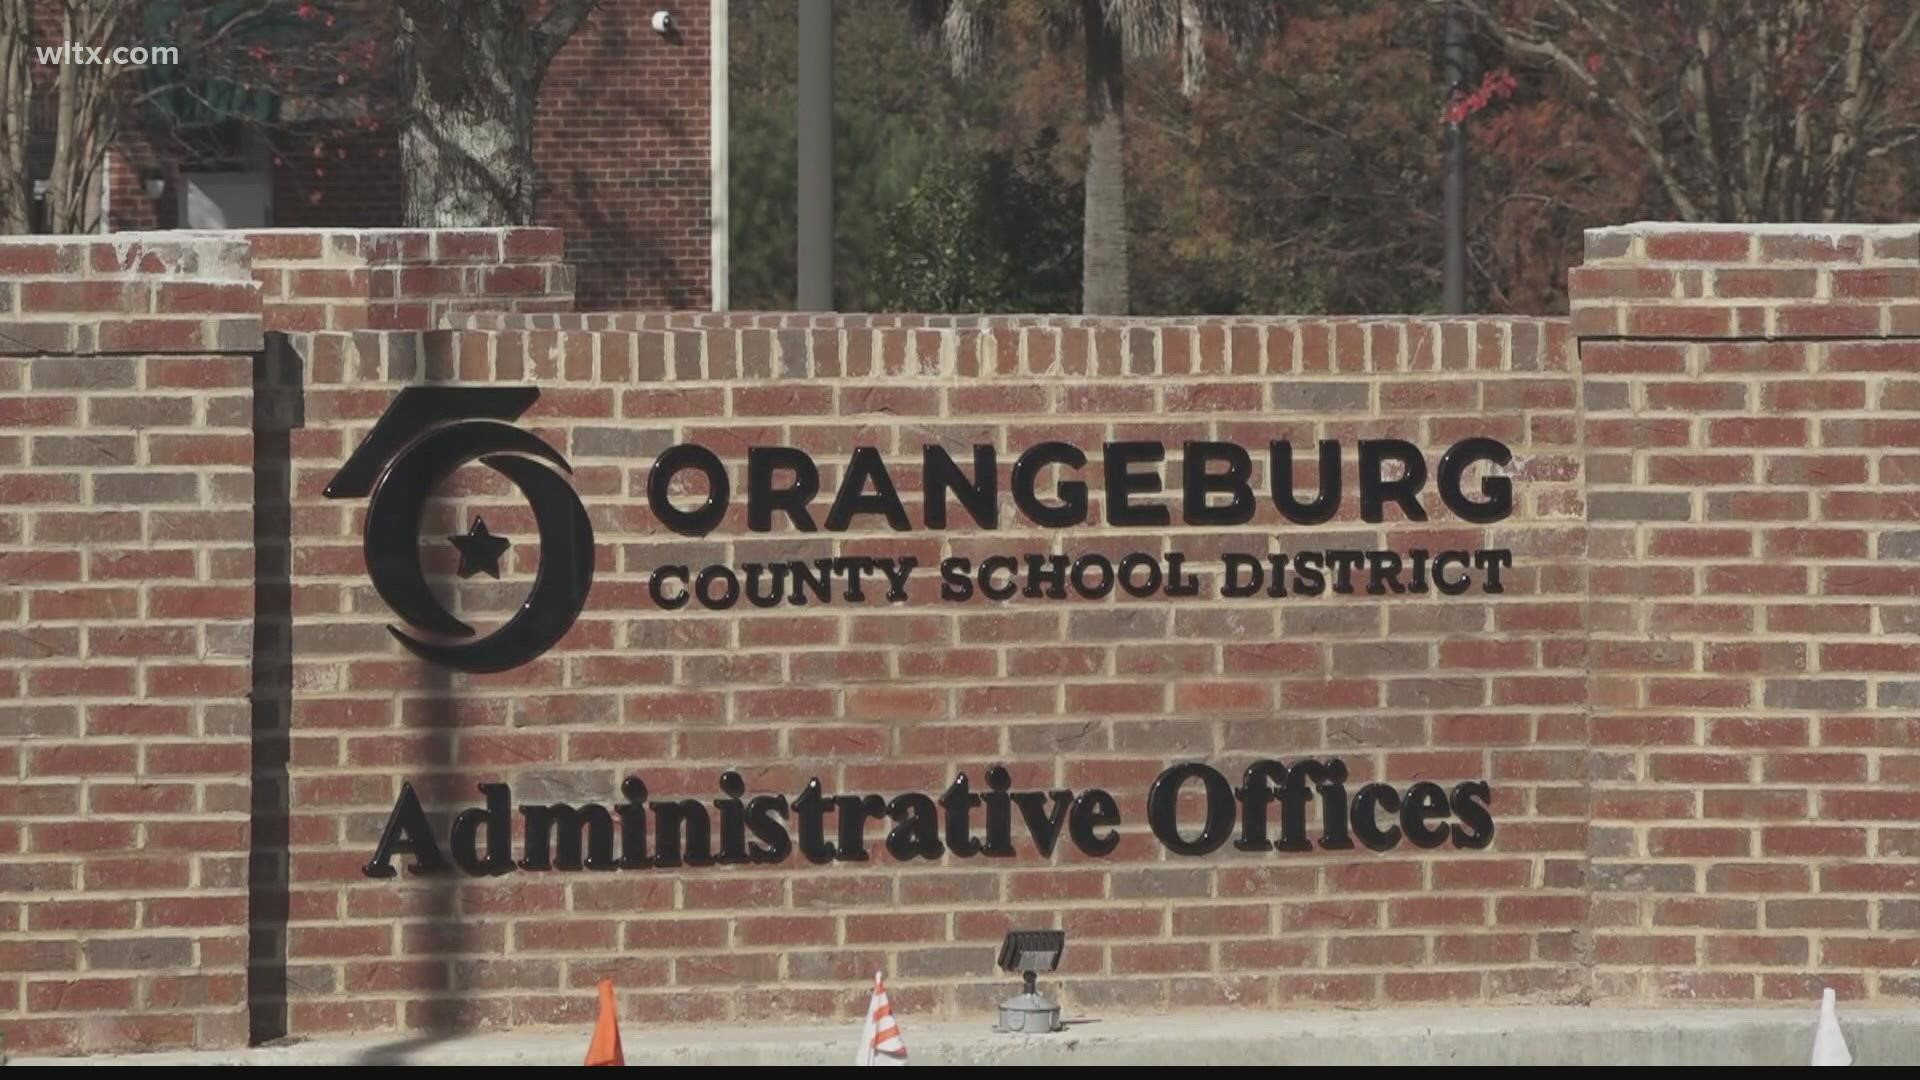 An Orangeburg County man pleaded guilty on Thursday to defrauding the school district he worked for out of more than half a million dollars.